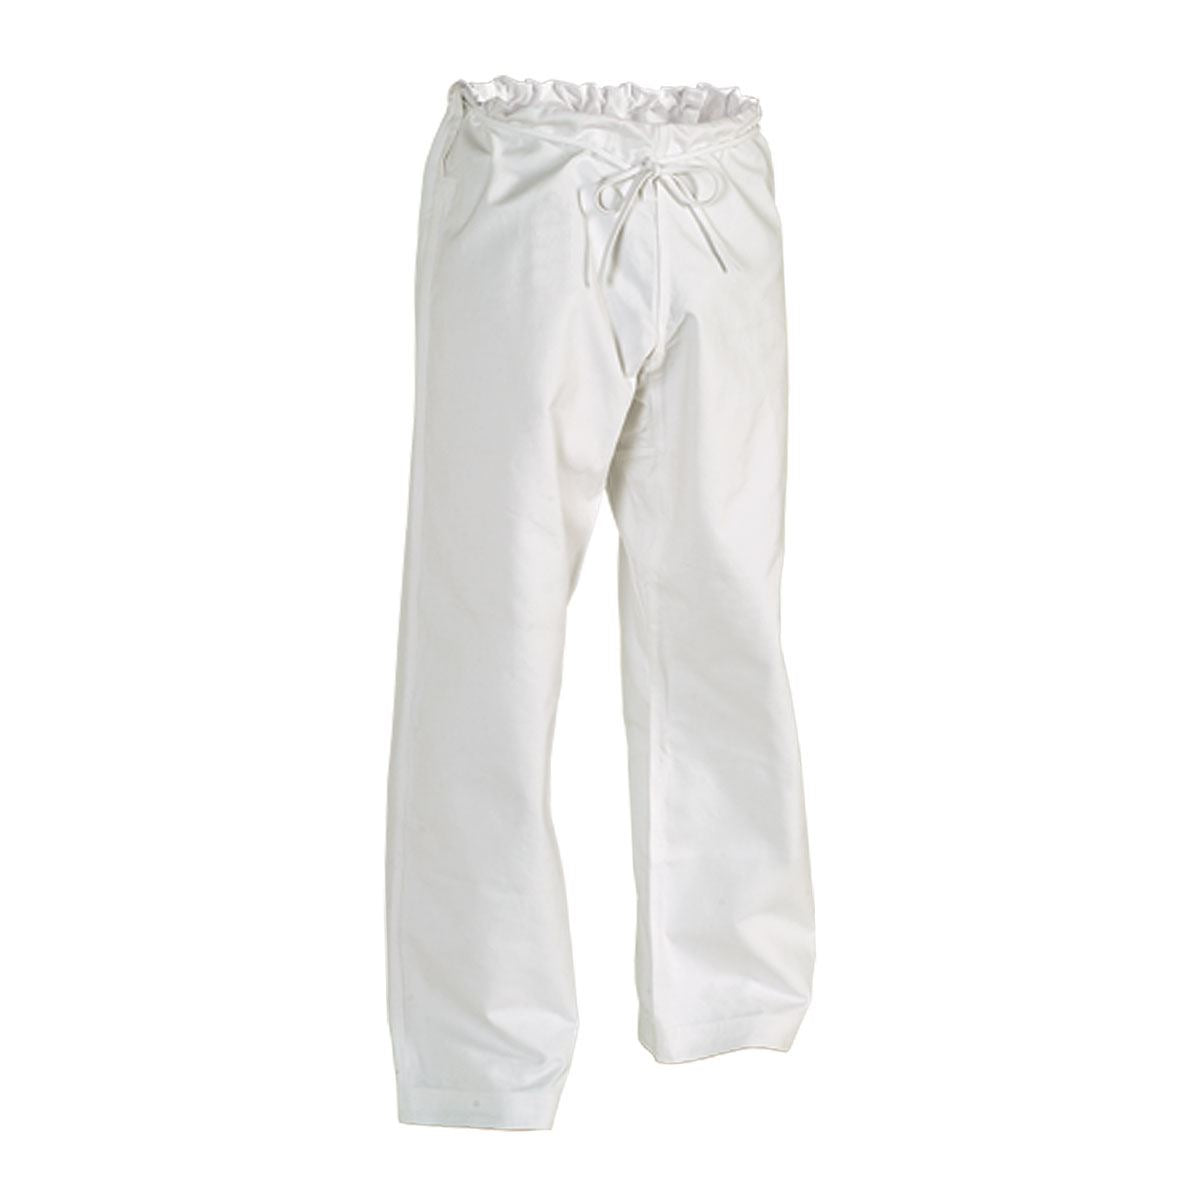 12 oz. Heavyweight Brushed Cotton Uniform front picture of white pants only.